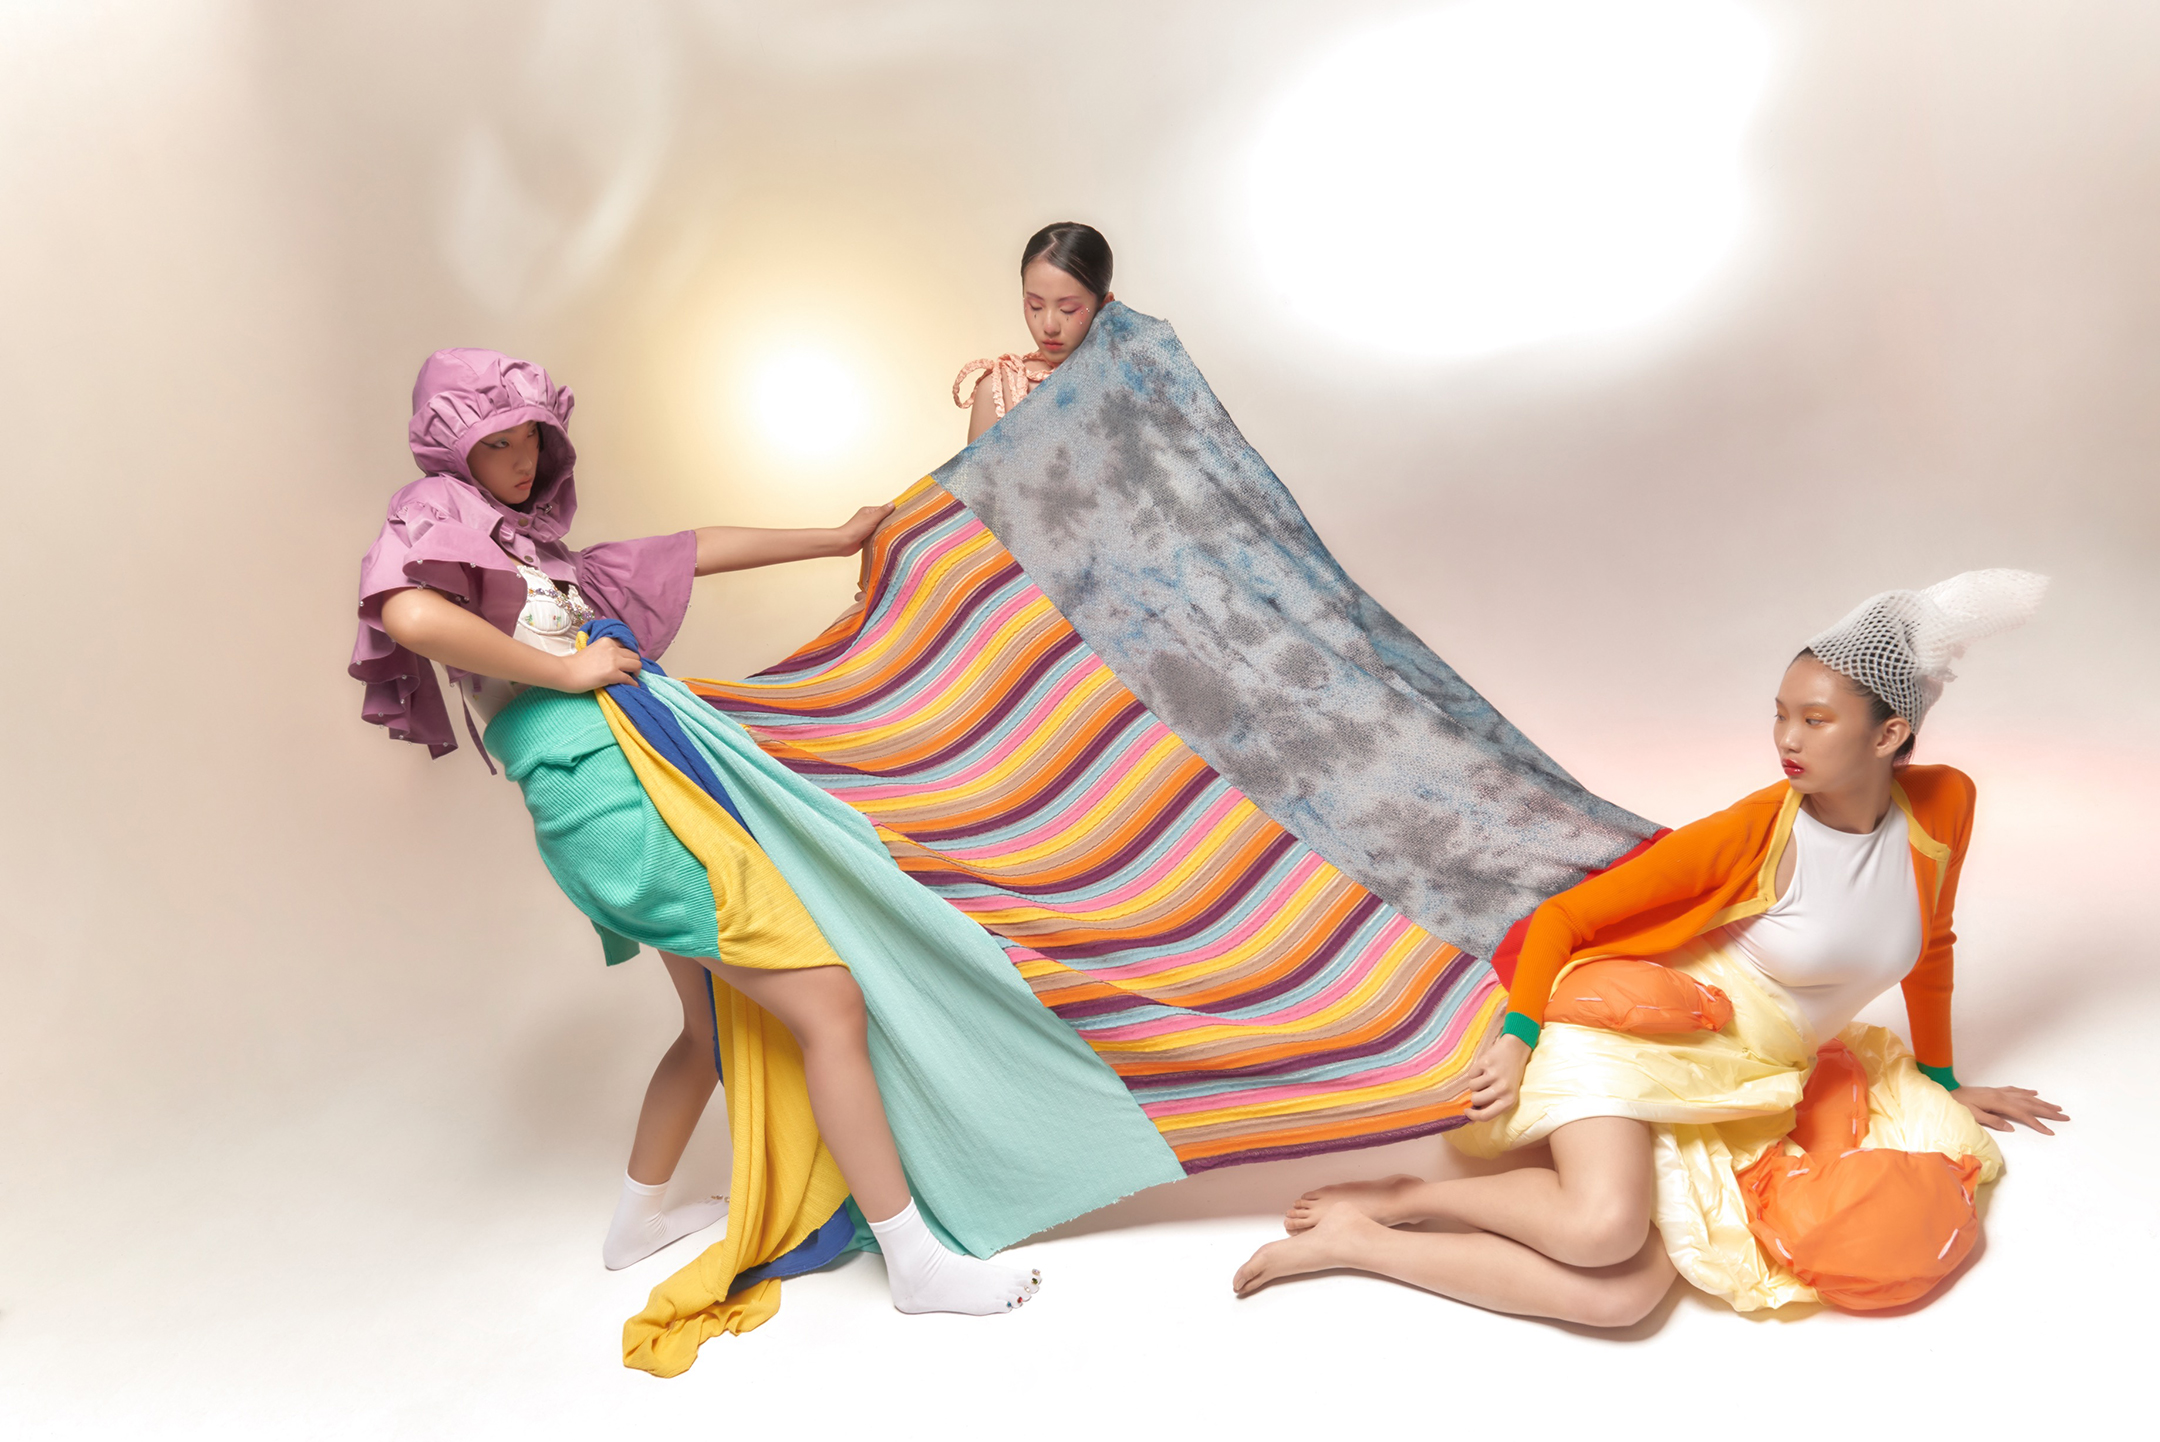 Photograph of three young women pulling at a large blanket